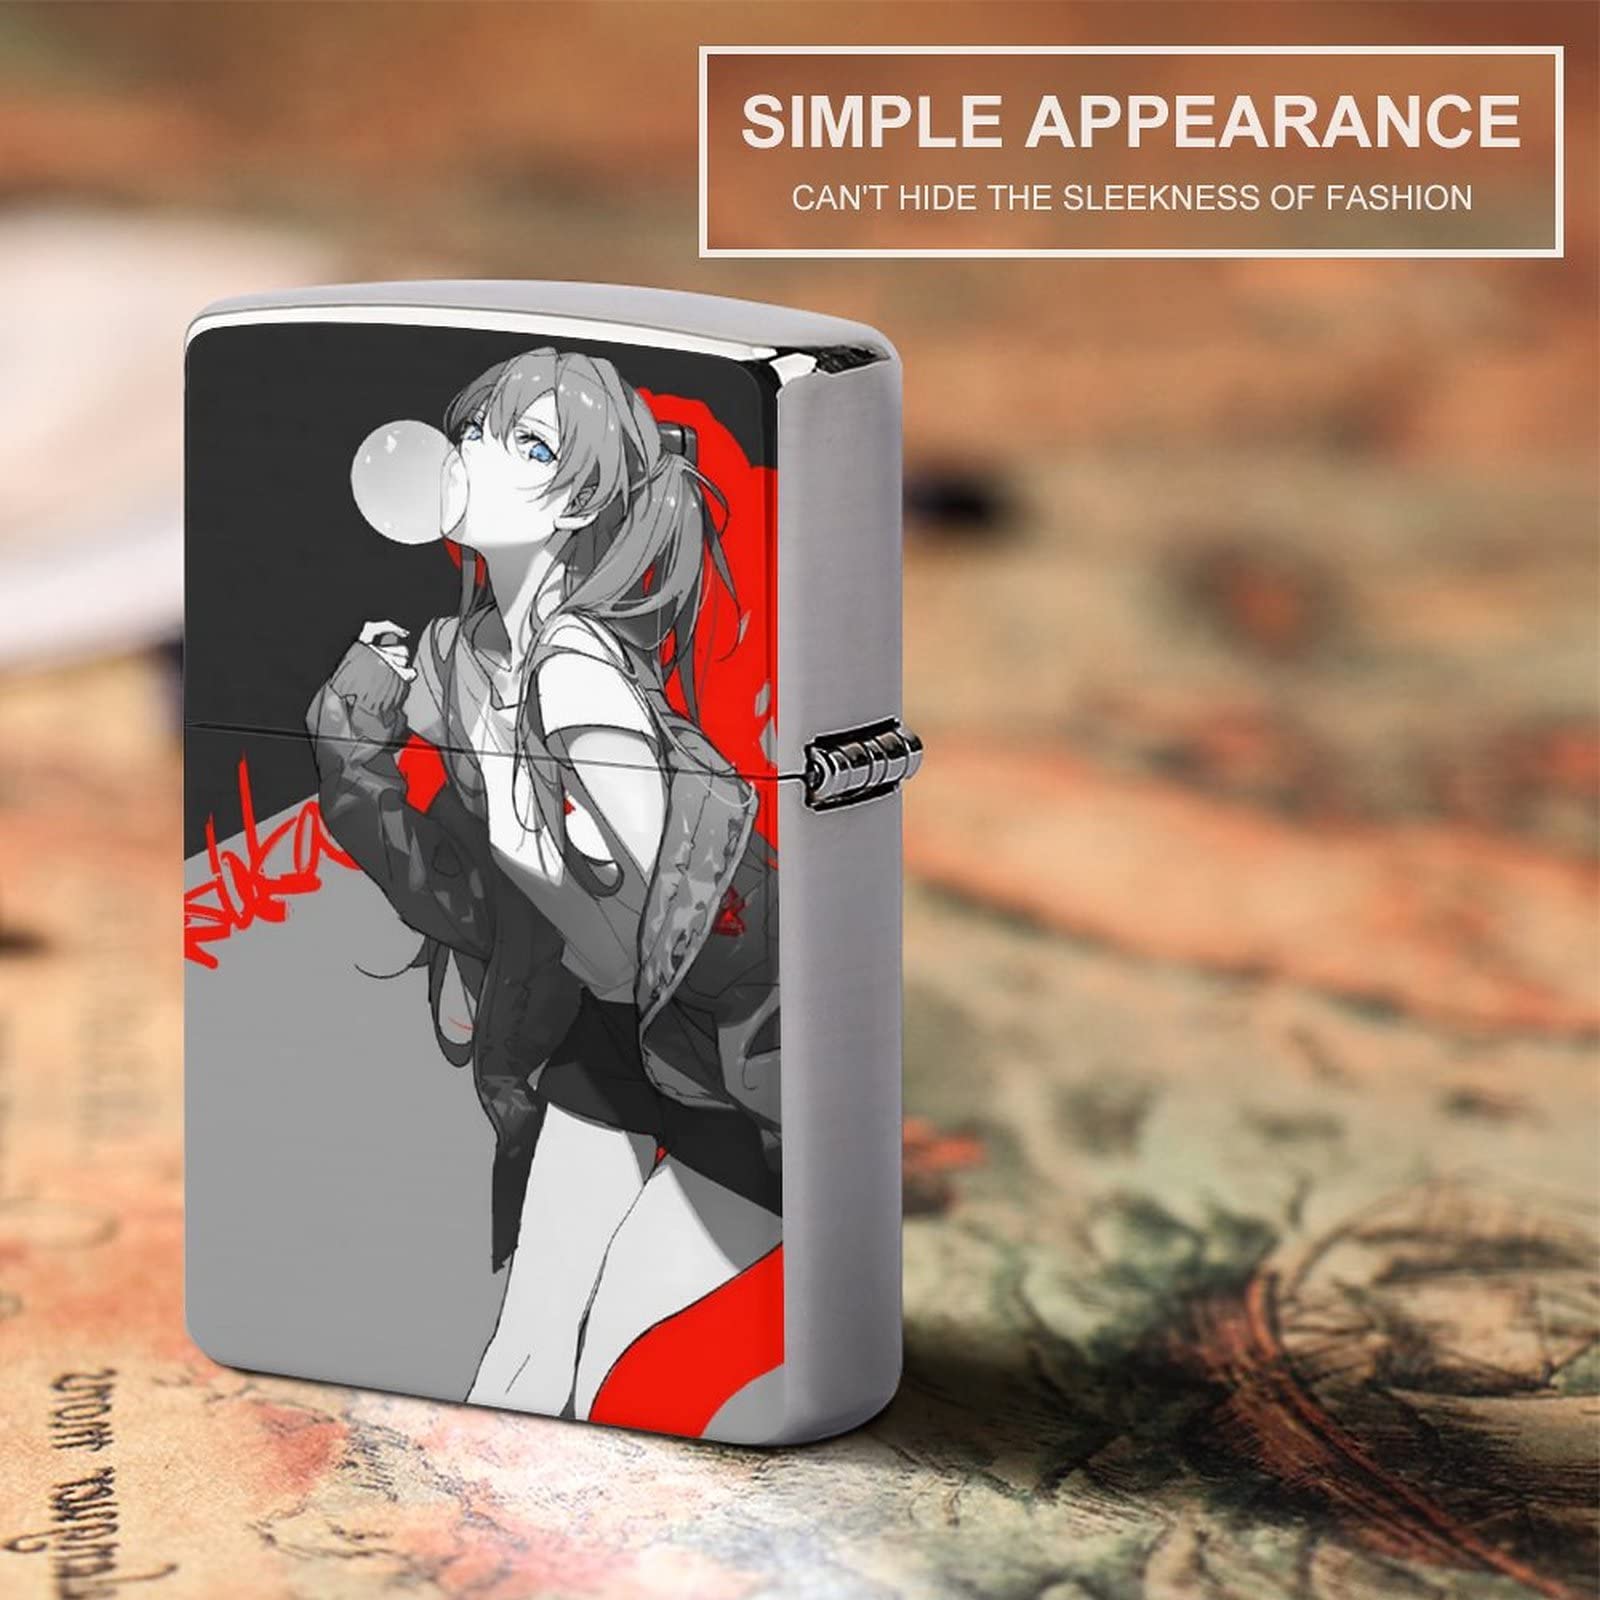 Neon Genesis Evangelion Lighter, Armor, ZIPPO Case, Lightweight, Mountaineering, Camping, Lighter, Small, Windproof, Silver, Replacement Outer Case, Birthday, Anniversary, Gift, Waterproof, Electronic Lighter Case, Climbing, Camping, Cycling